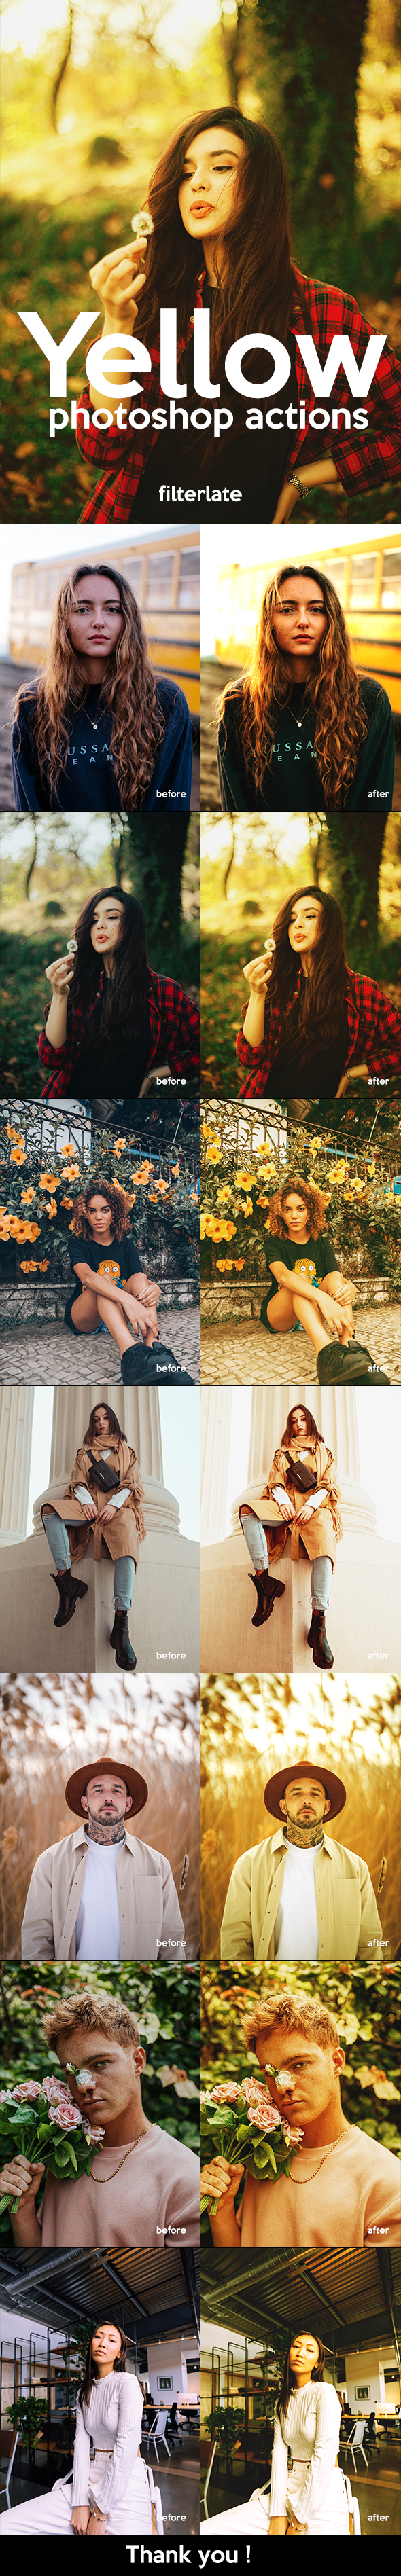 [DOWNLOAD]Yellow Actions Photoshop